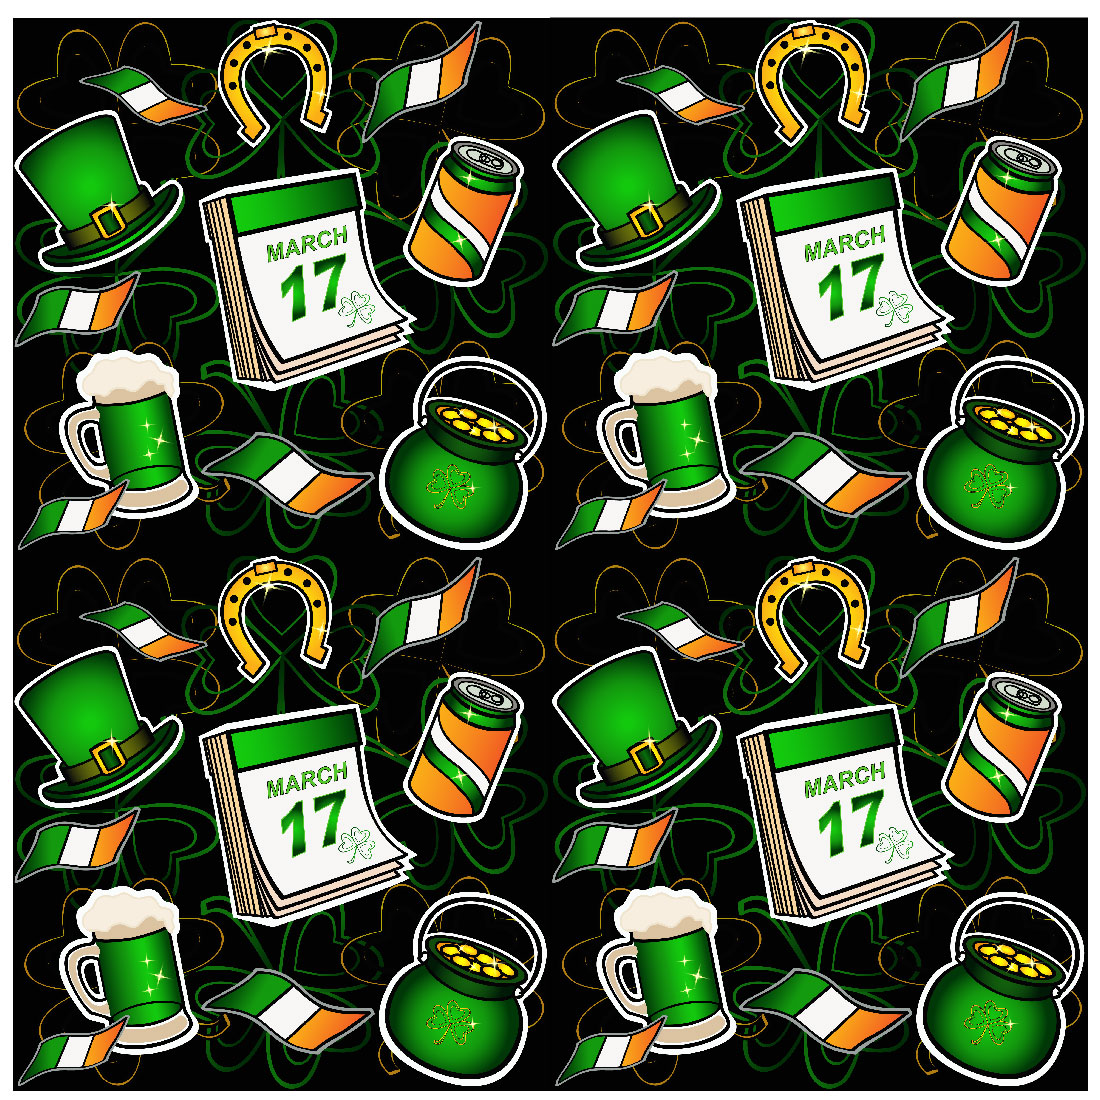 St patrick's day pattern with mugs of beer and shamrocks.